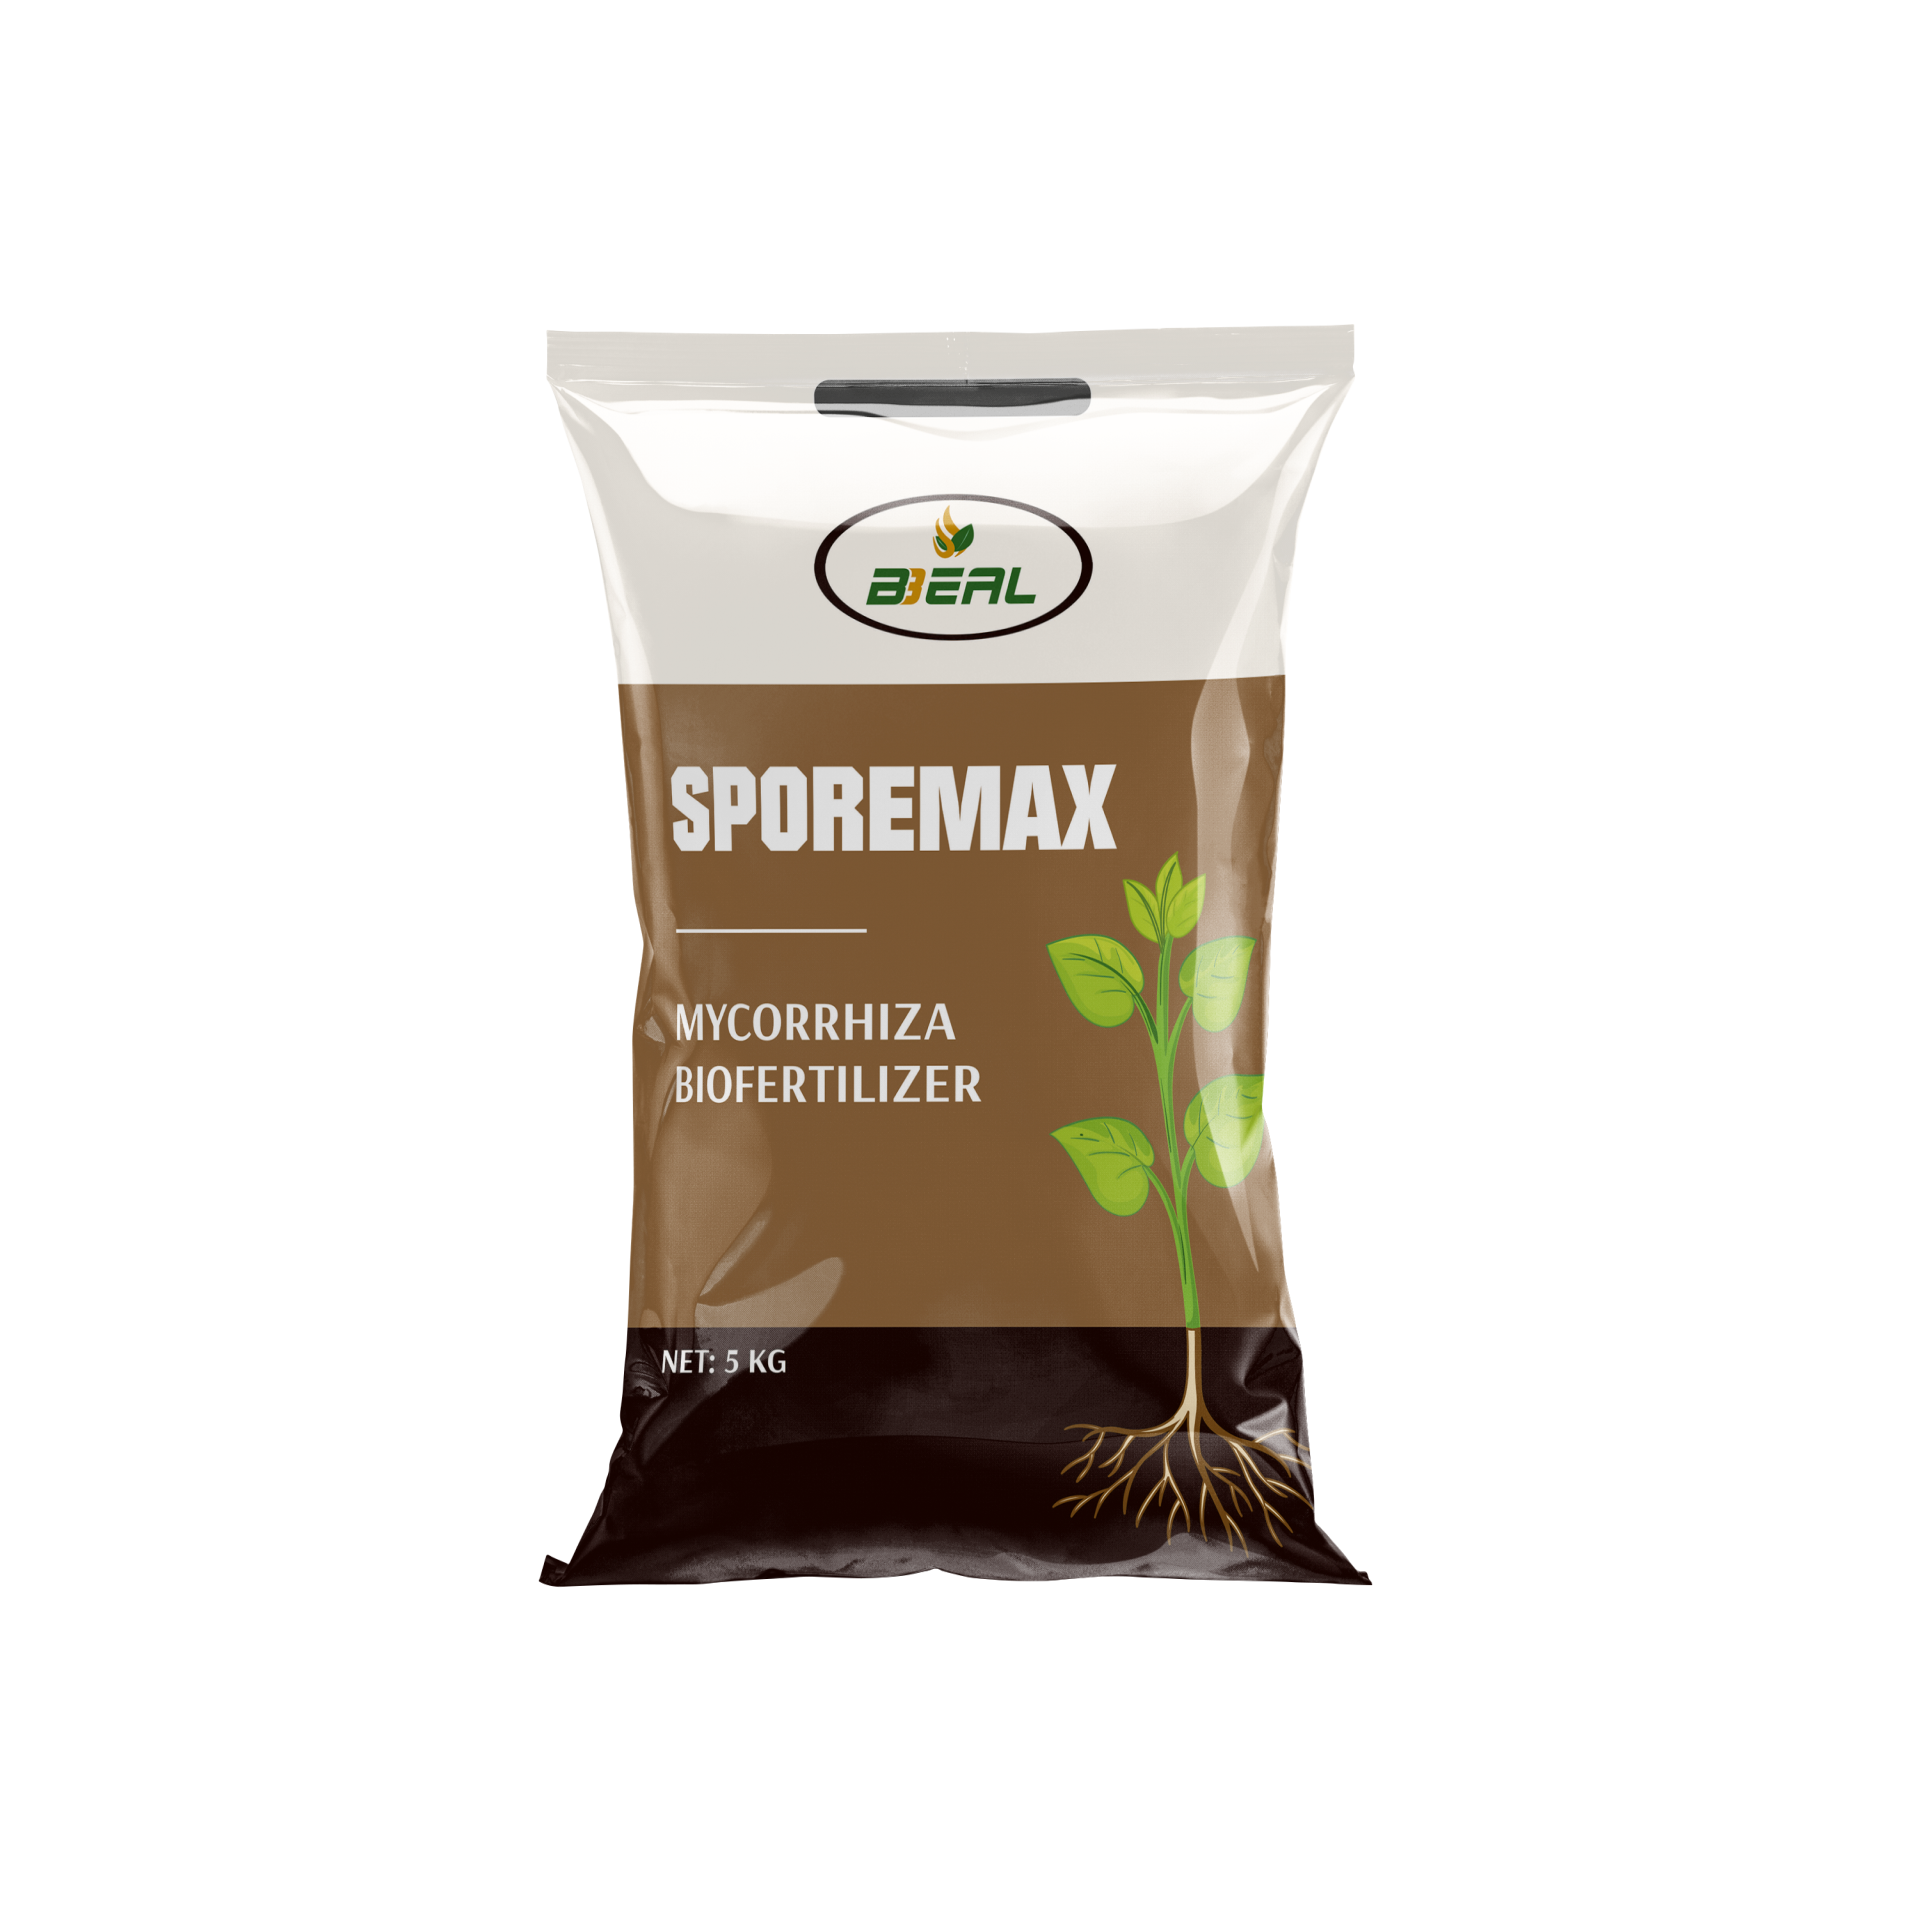 SporeMax is a must-have for any farmer looking to achieve better crop yields this planting season